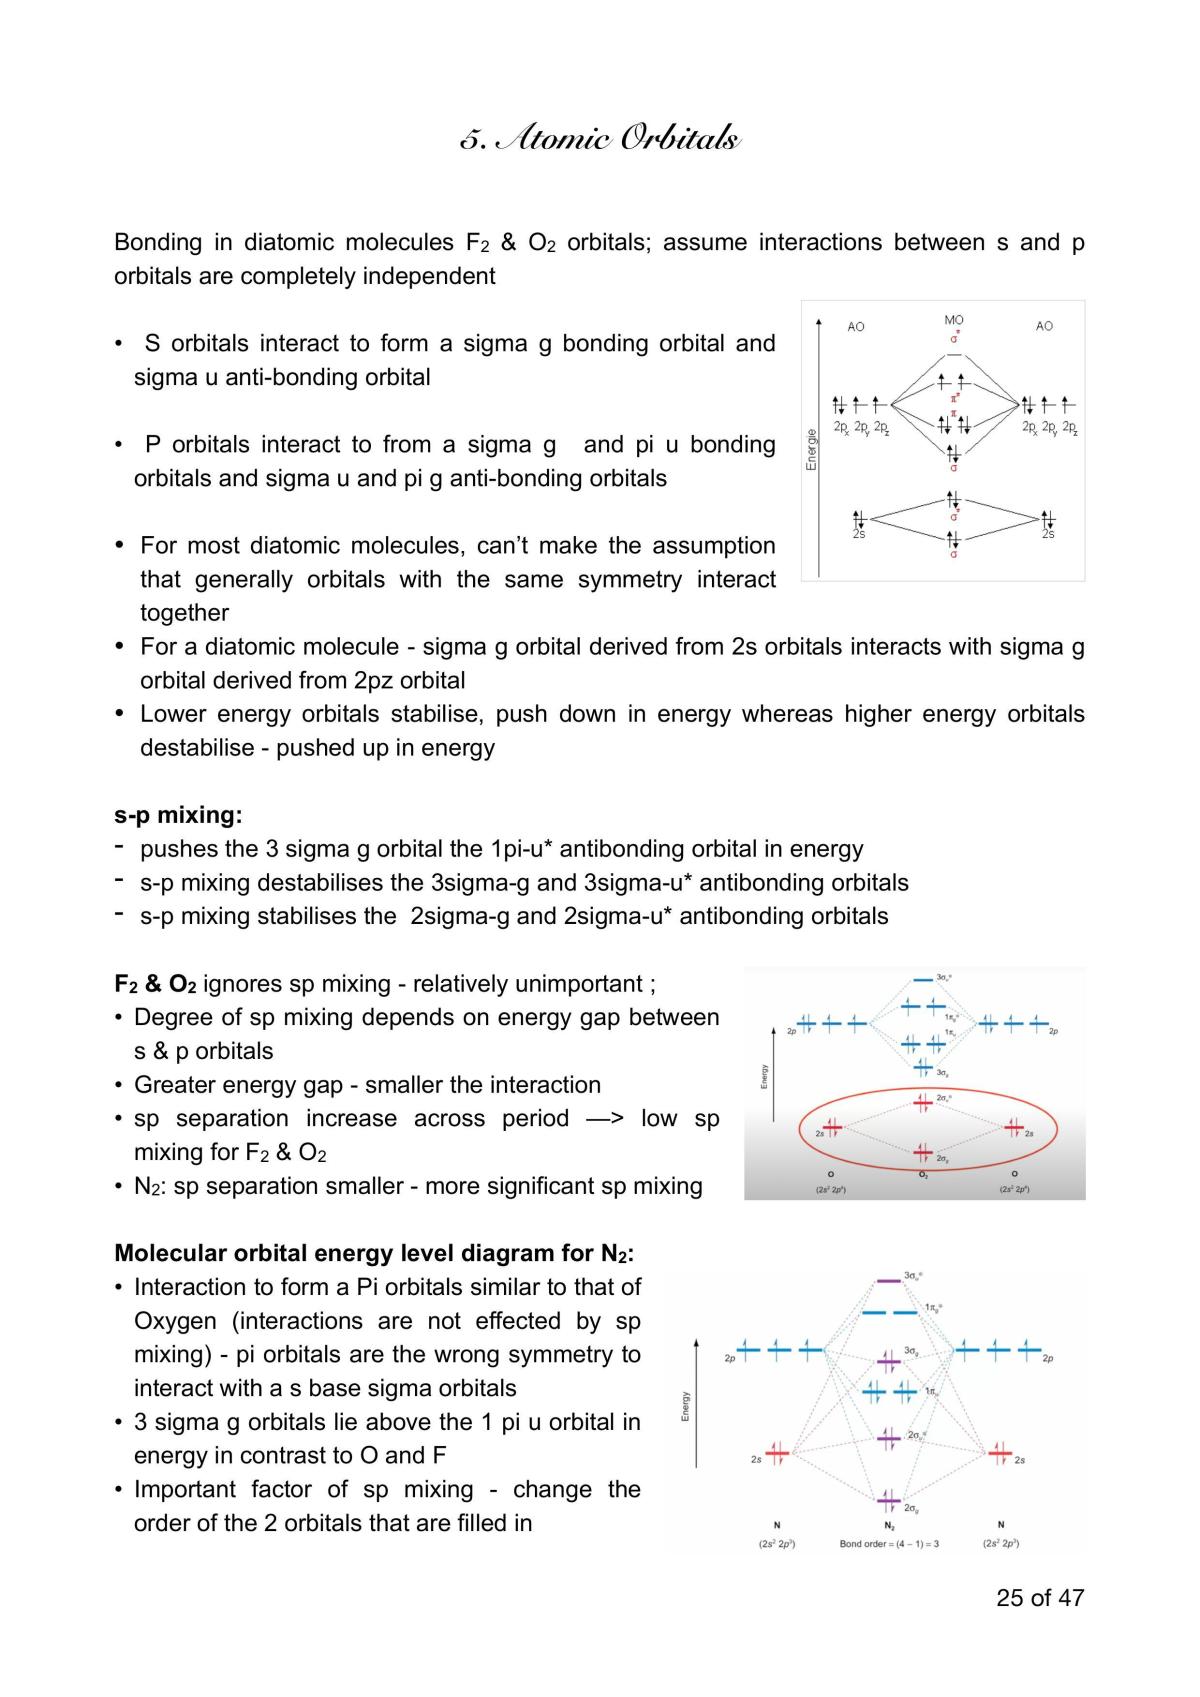 Notes for Principles and Processes in Chemistry - Page 25